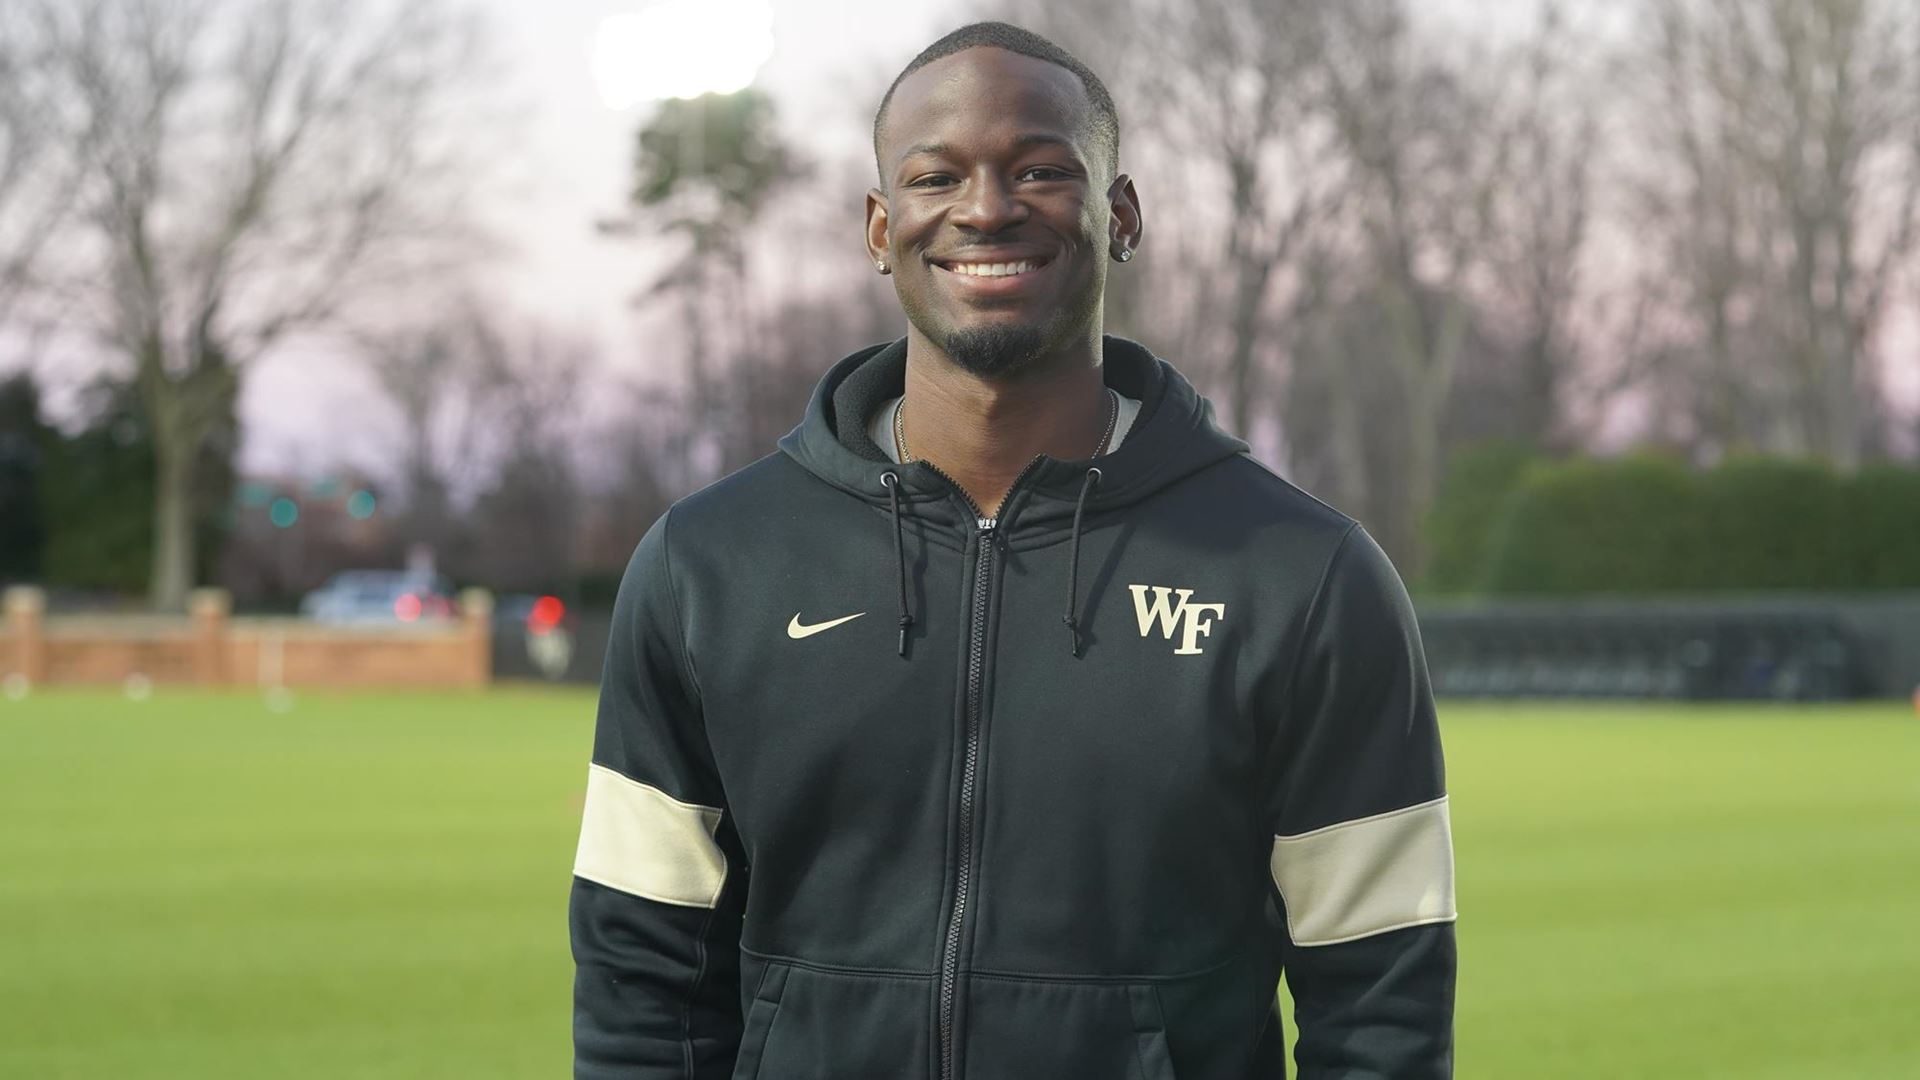 Wake Forest men's soccer adds Ade Taiwo to coaching staff - SoccerWire